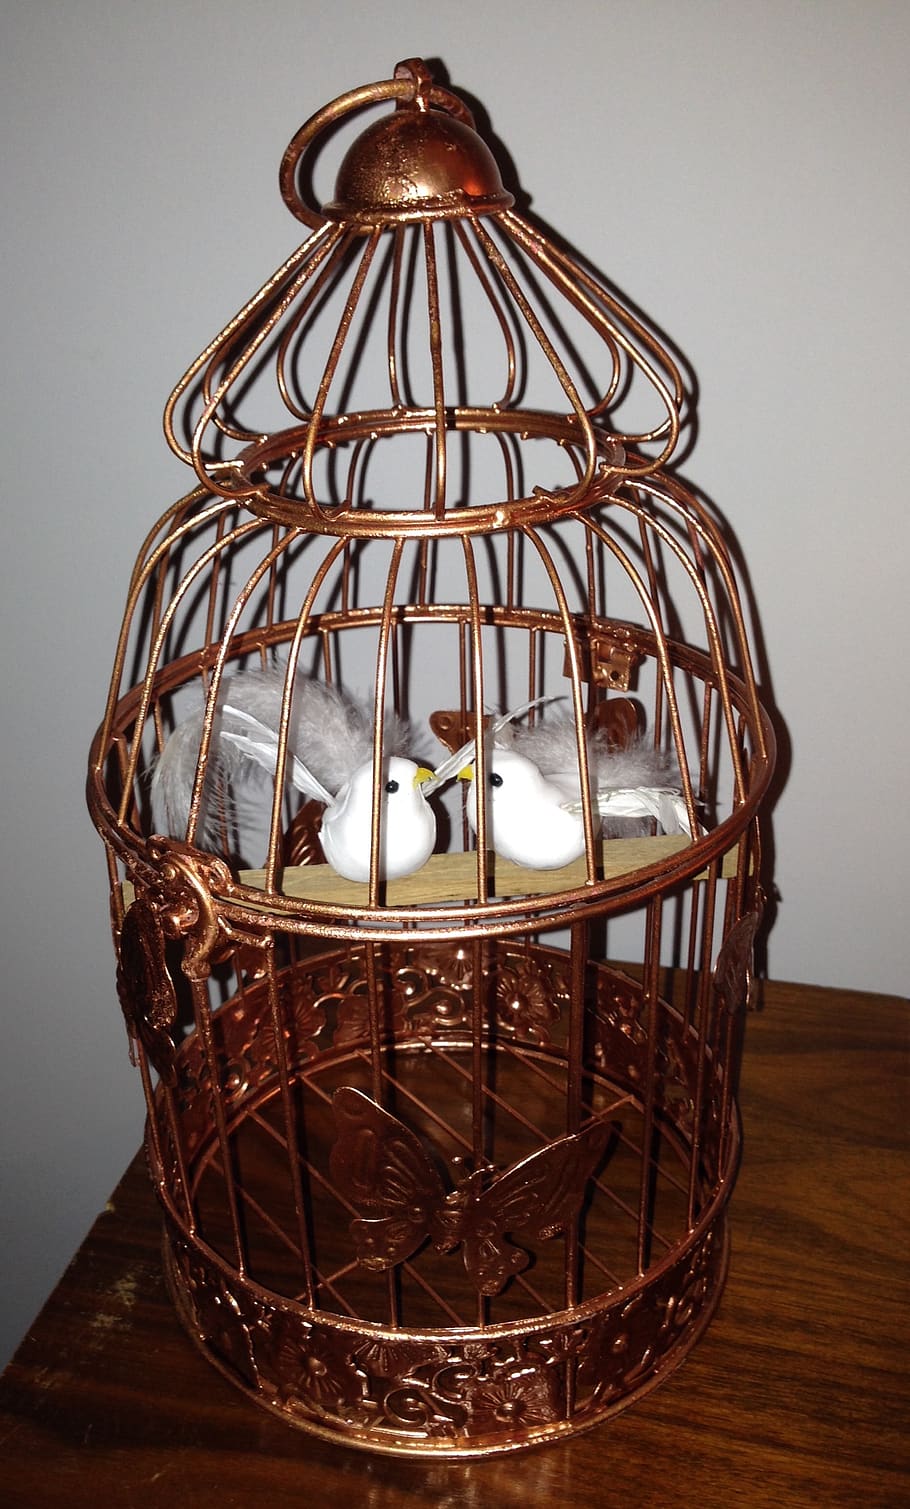 cage, bird, couple birds, indoors, close-up, candle, decoration, flame, table, lighting equipment